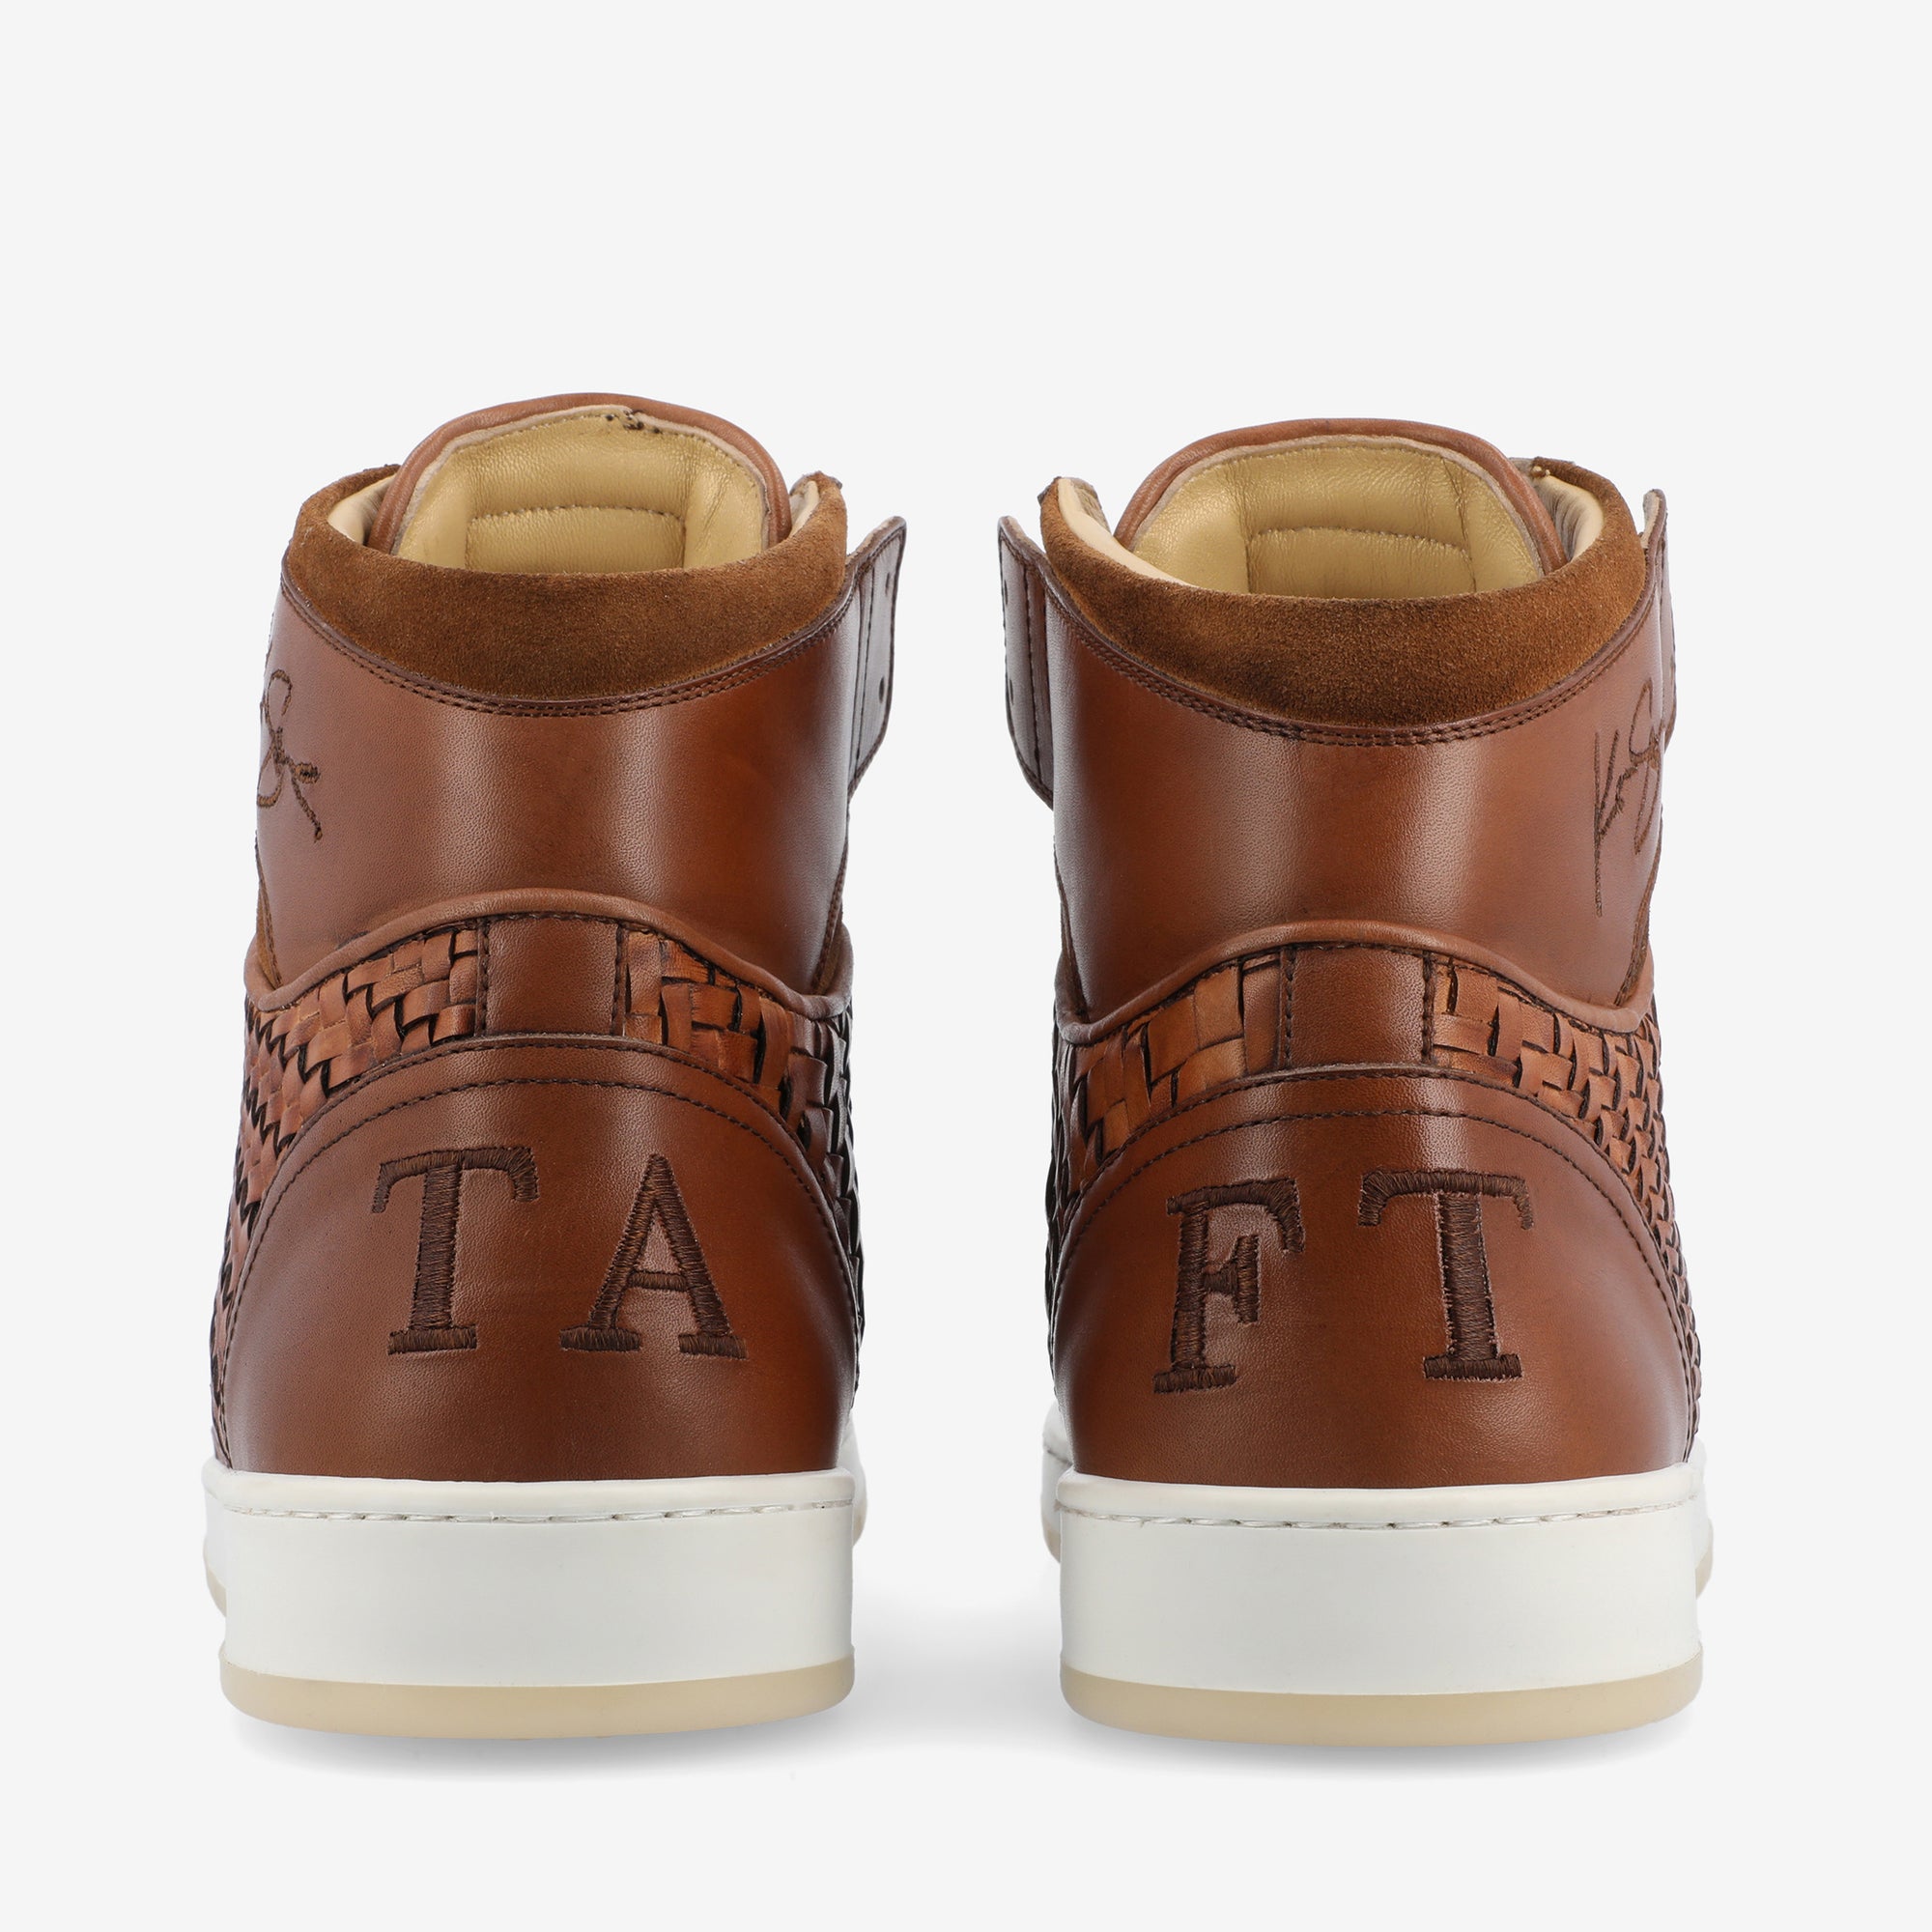 Rapido Brown Leather Sneakers - Brown Woven